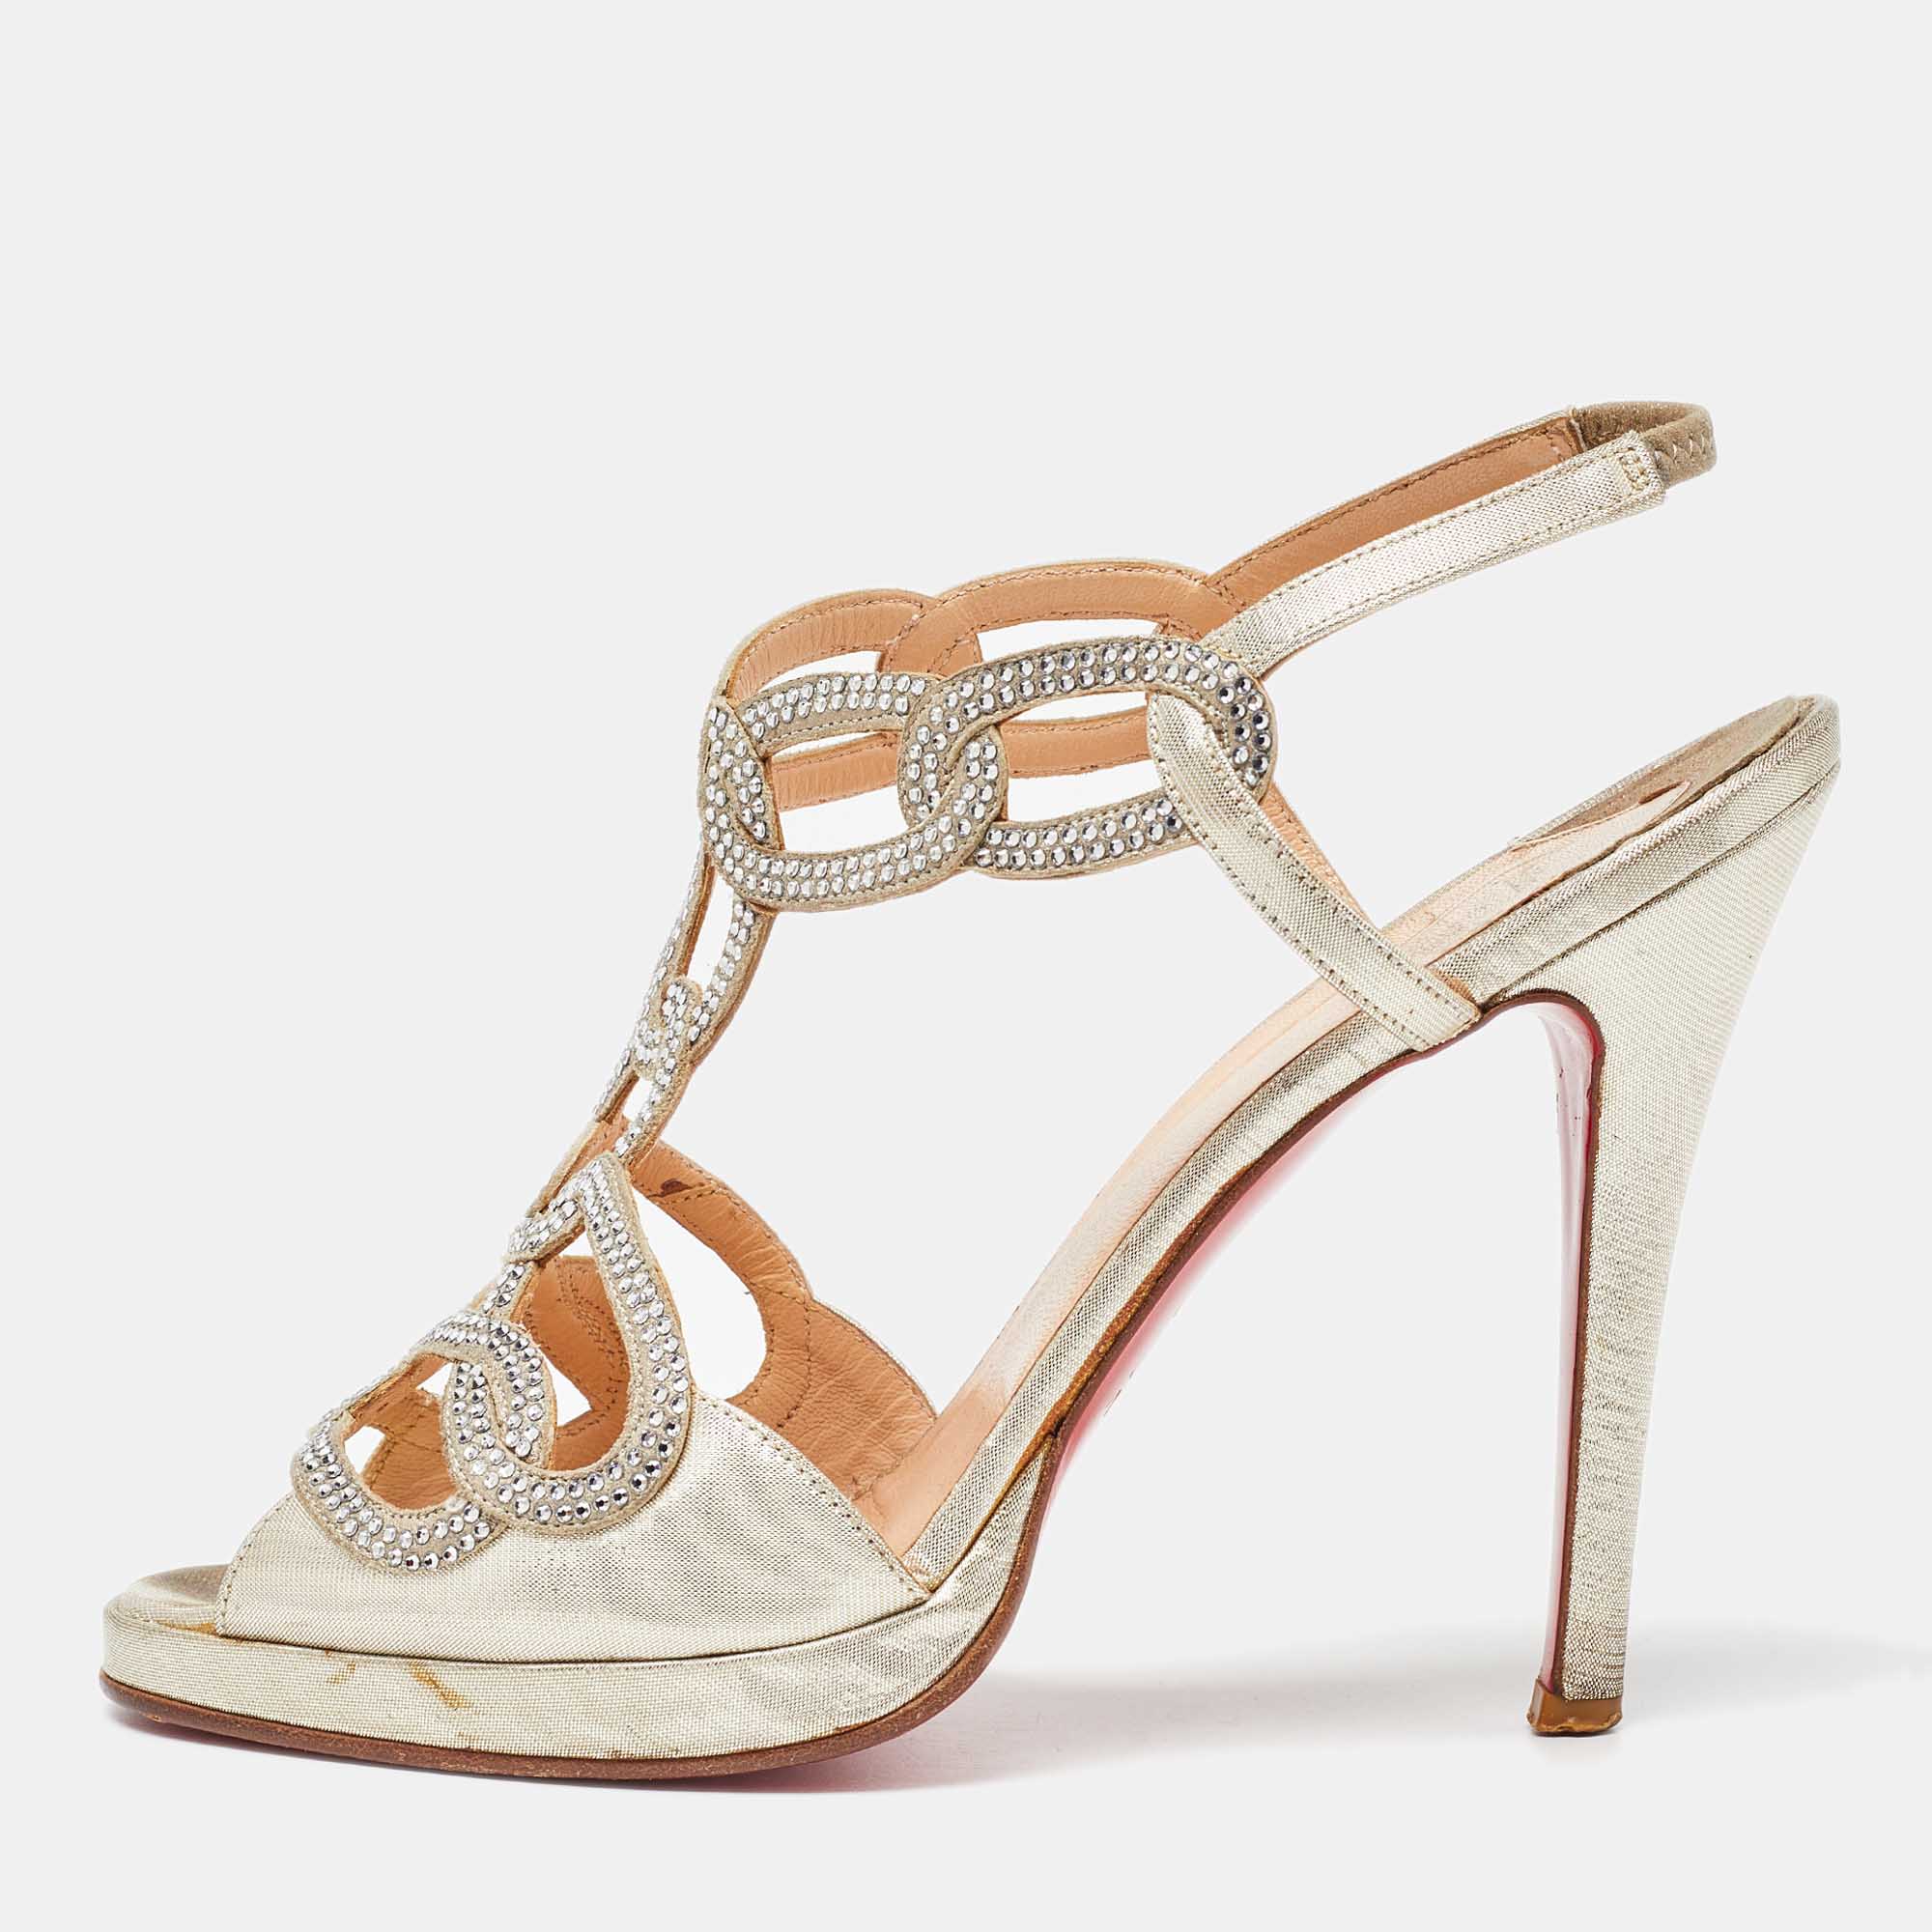 Christian Louboutin Gold Lurex Fabric Crystal Embellished Ankle Strap Sandals Size 38